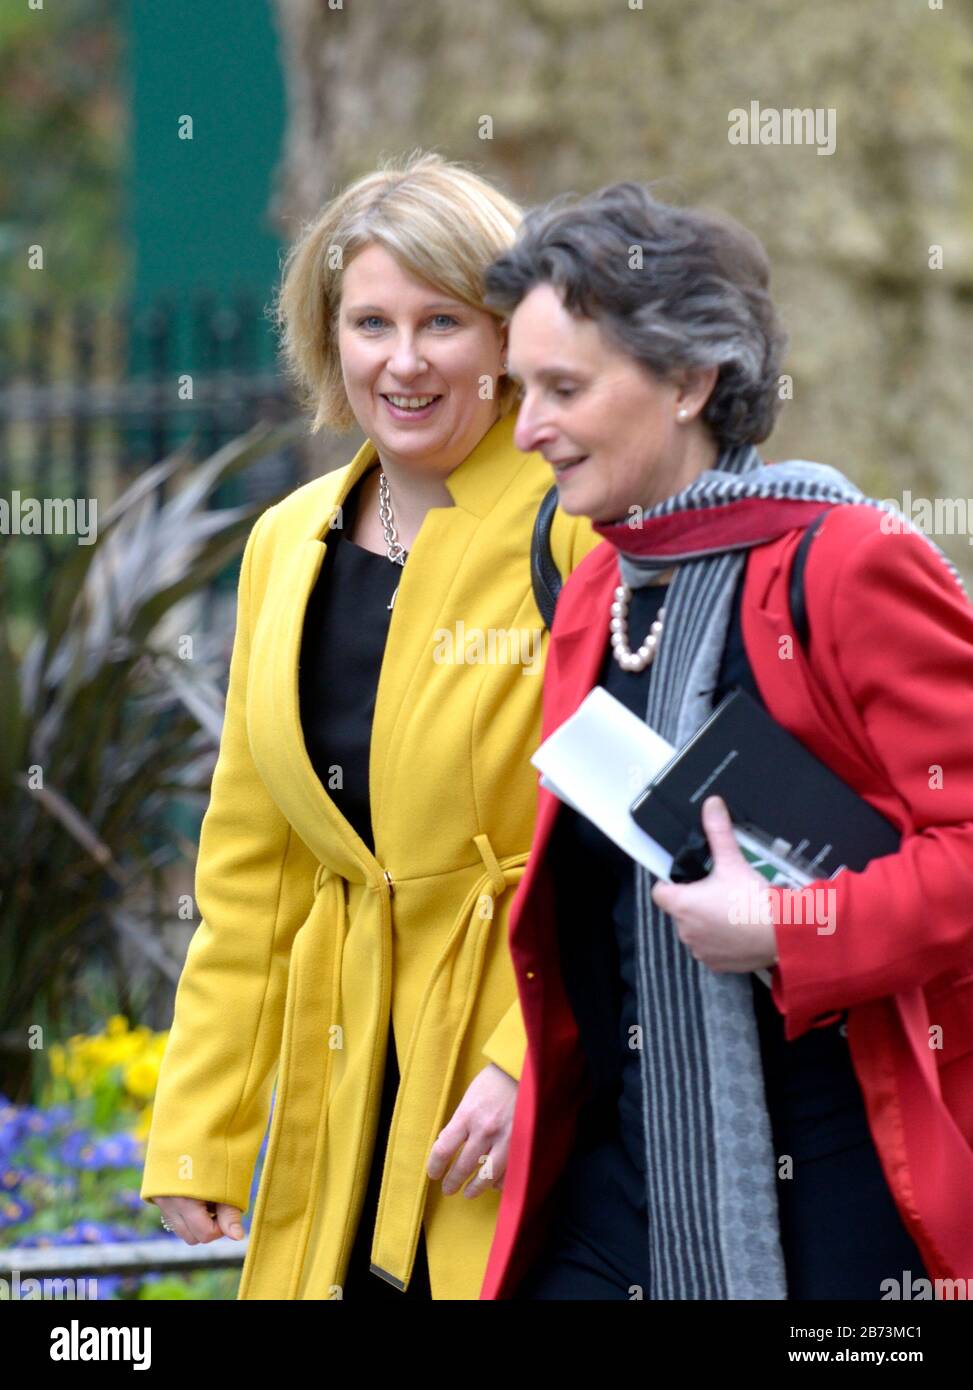 Katherine Fletcher MP (Con: South Ribble) and Flick (Felicia Jane Beatrix) Drummond (Con: Meon Valley) in Downing Street, 13th March 2020 Stock Photo